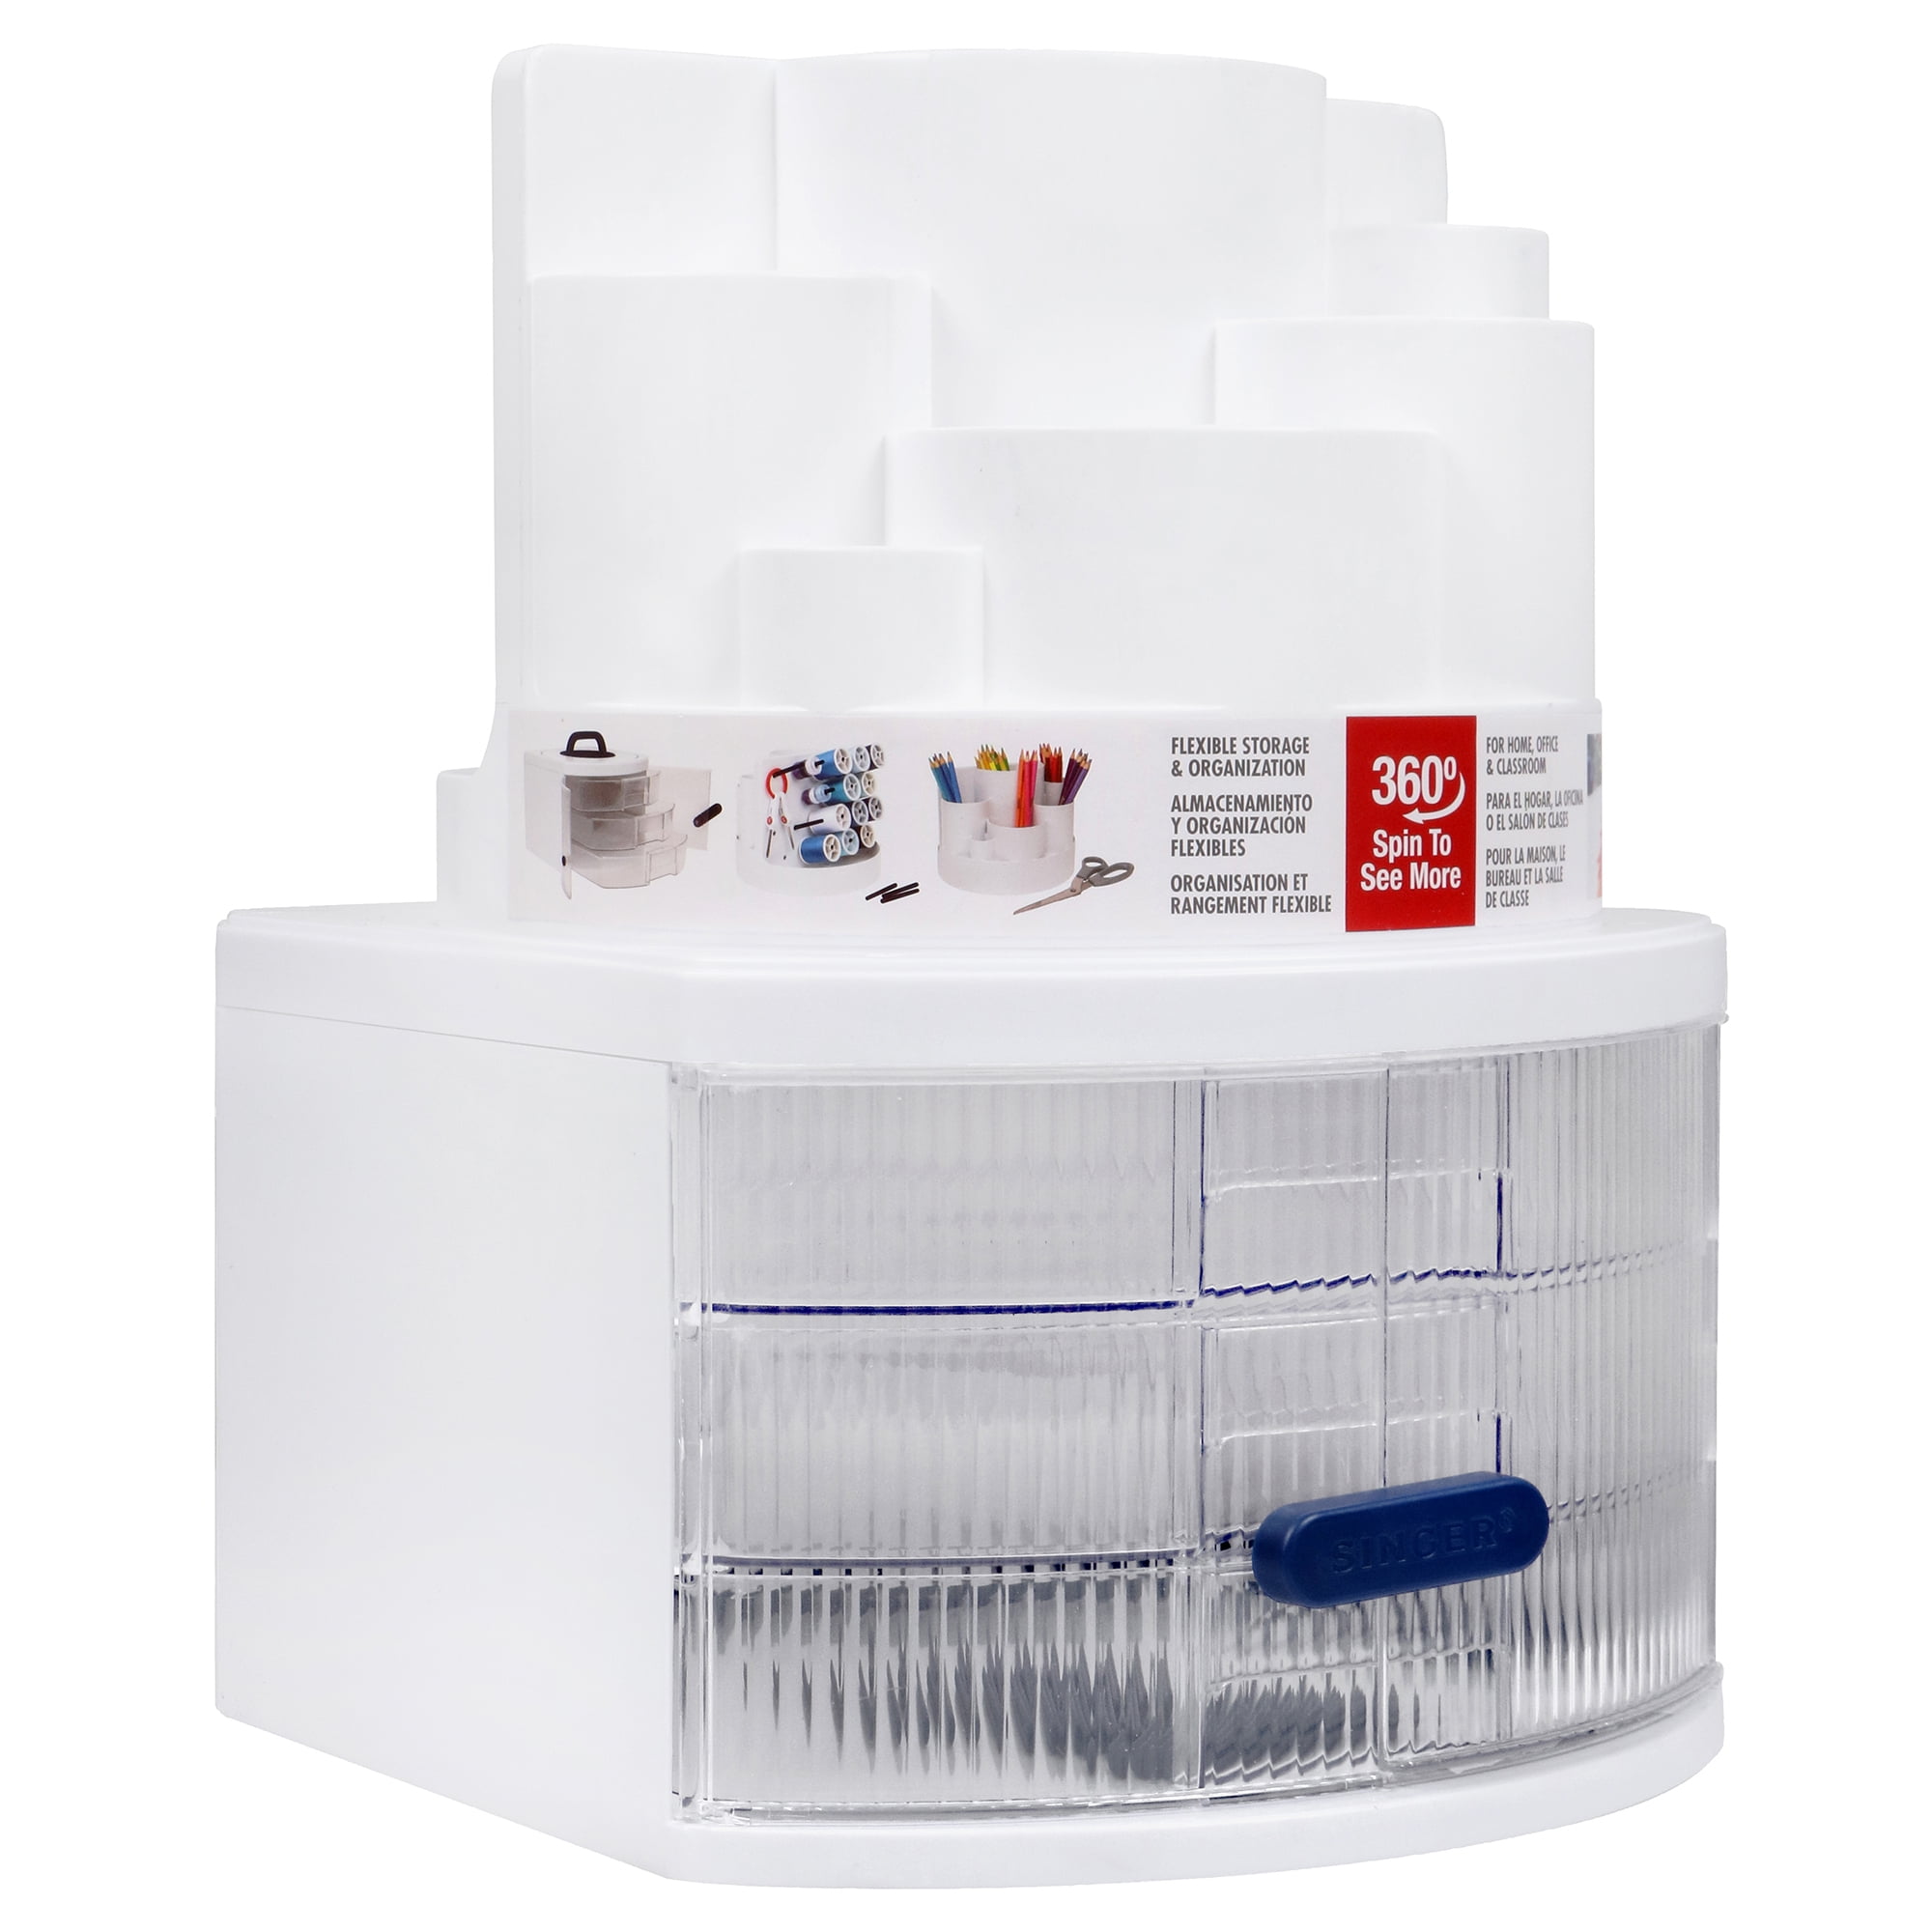 Singer Sew It Goes, Storage System with Sewing Notions, 244 pcs